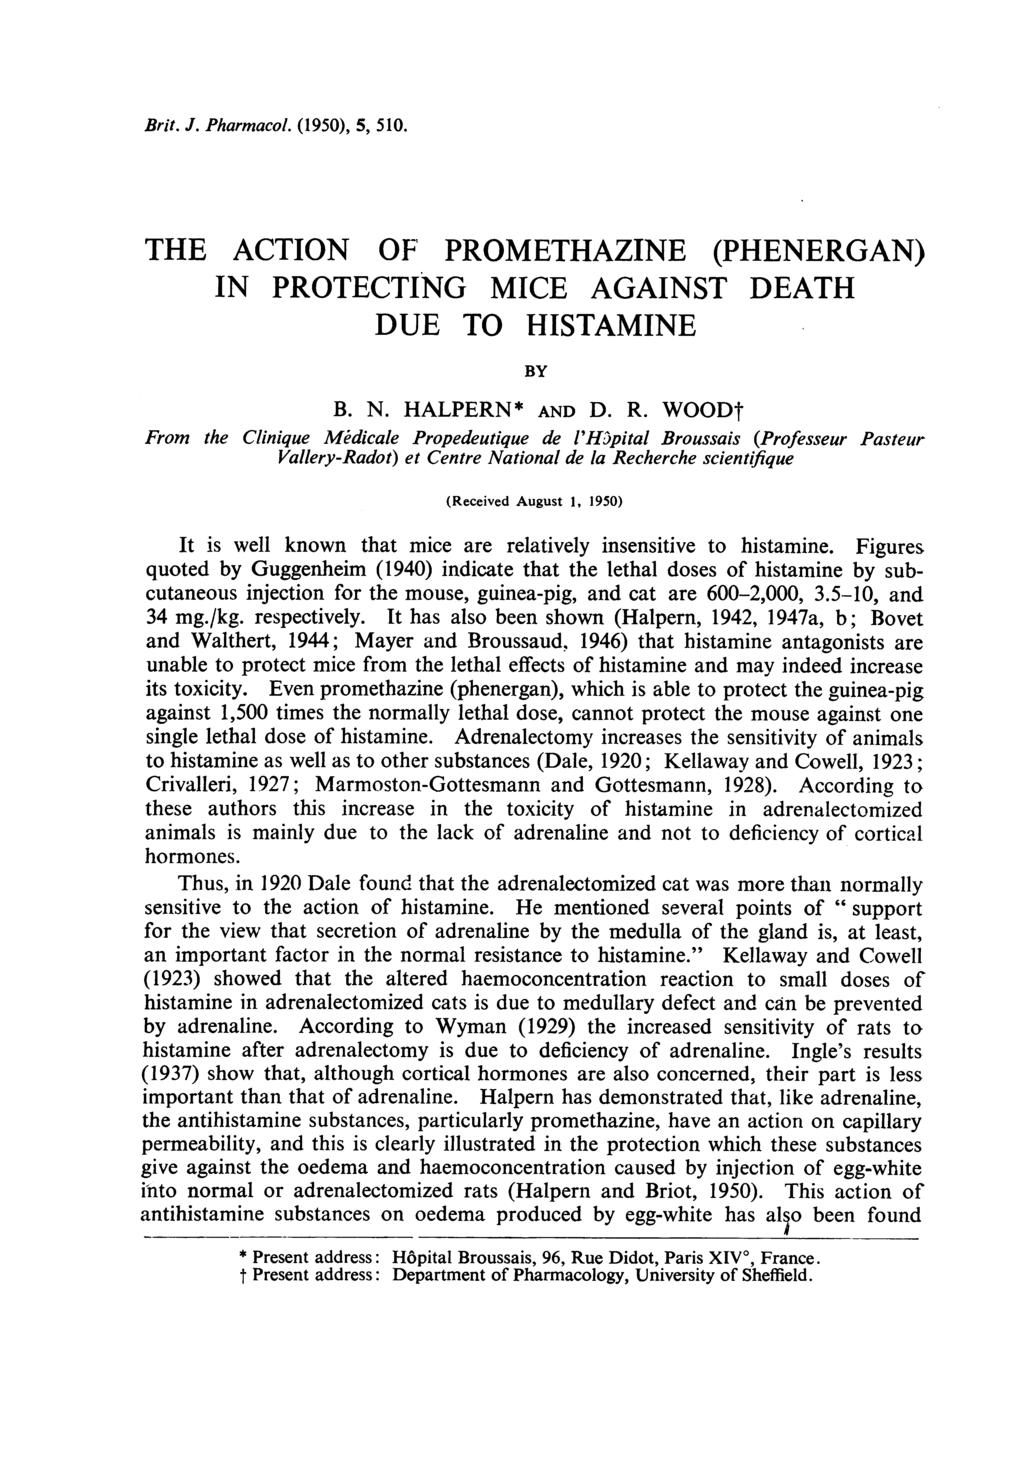 Brit. J. Pharmacol. (1950), 5, 510. THE ACTION OF PROMETHAZINE (PHENERGAN) IN PROTECTING MICE AGAINST DEATH DUE TO HISTAMINE BY B. N. HALPERN * AND D. R.